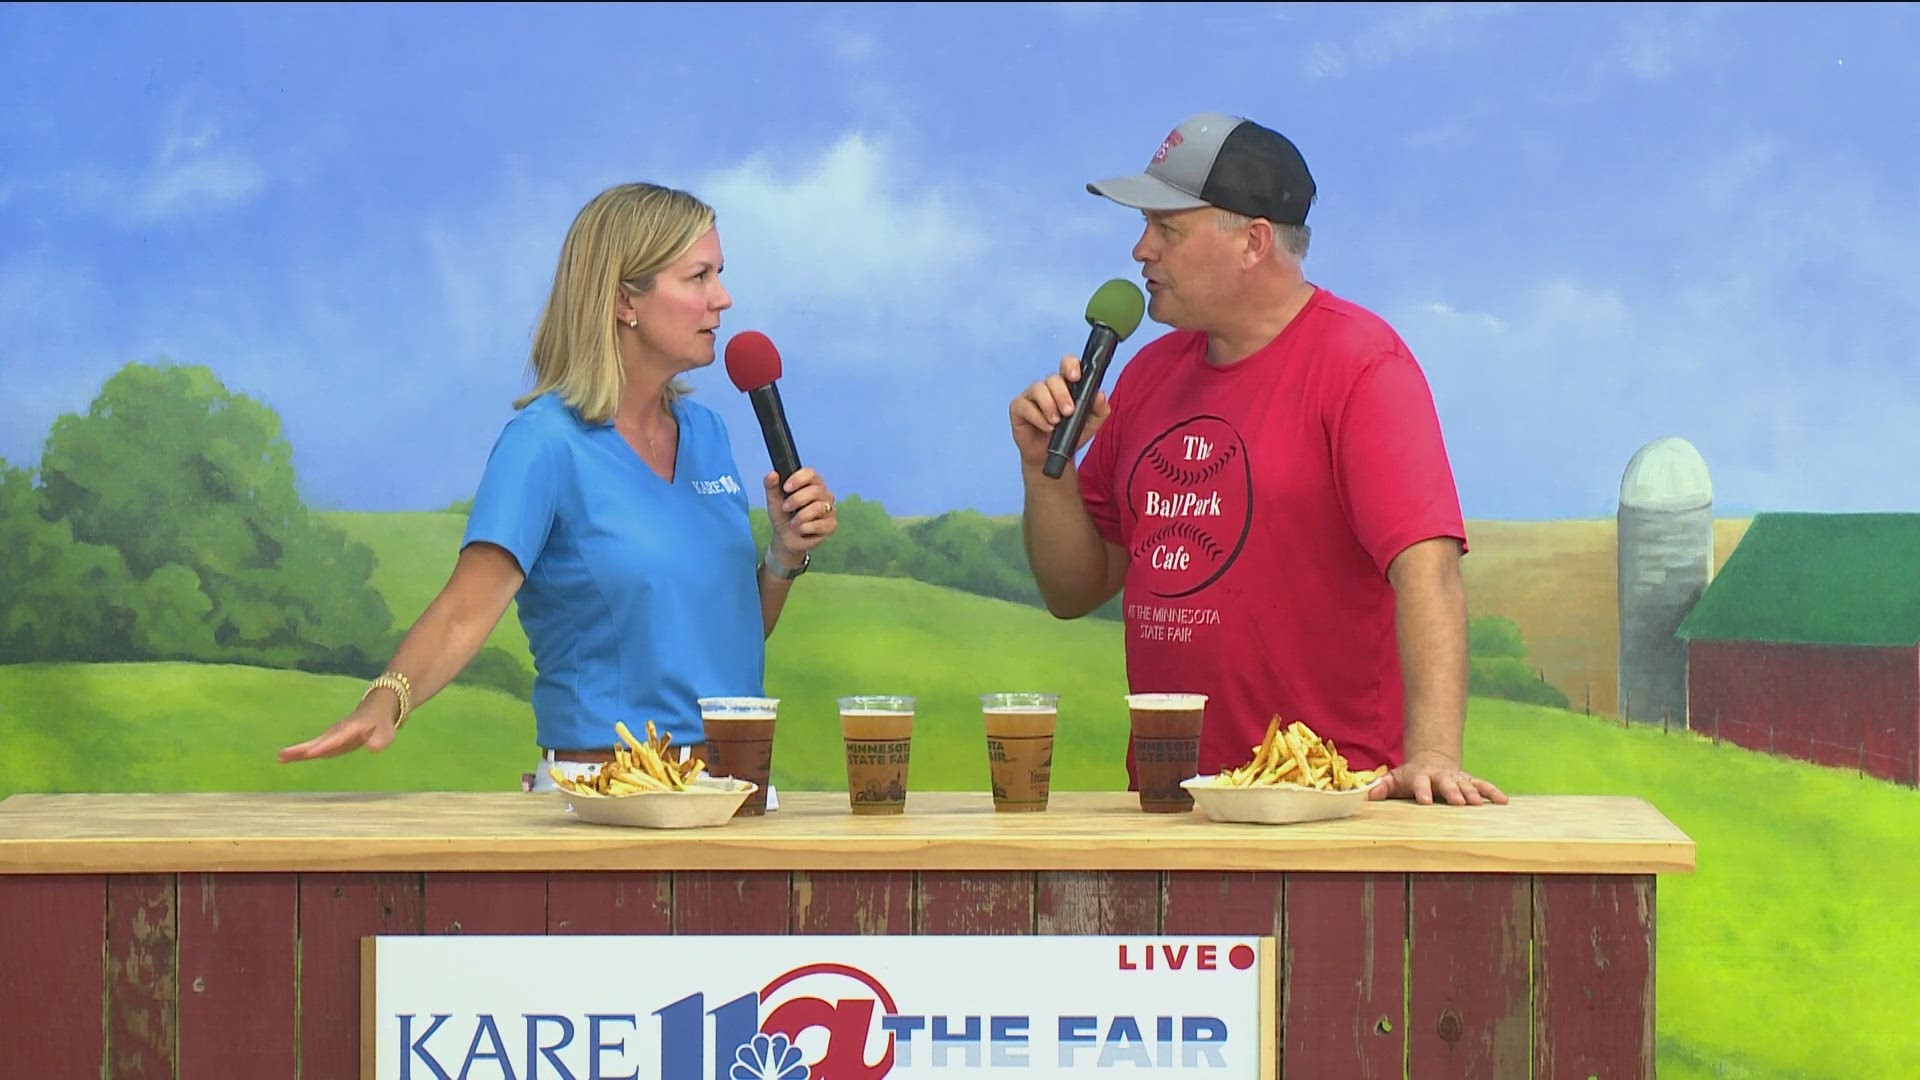 Owner Dan Theisen celebrated his 50th birthday by stopping by the KARE 11 Barn to talk about all the different beers available to the Ball Park Cafe booth.